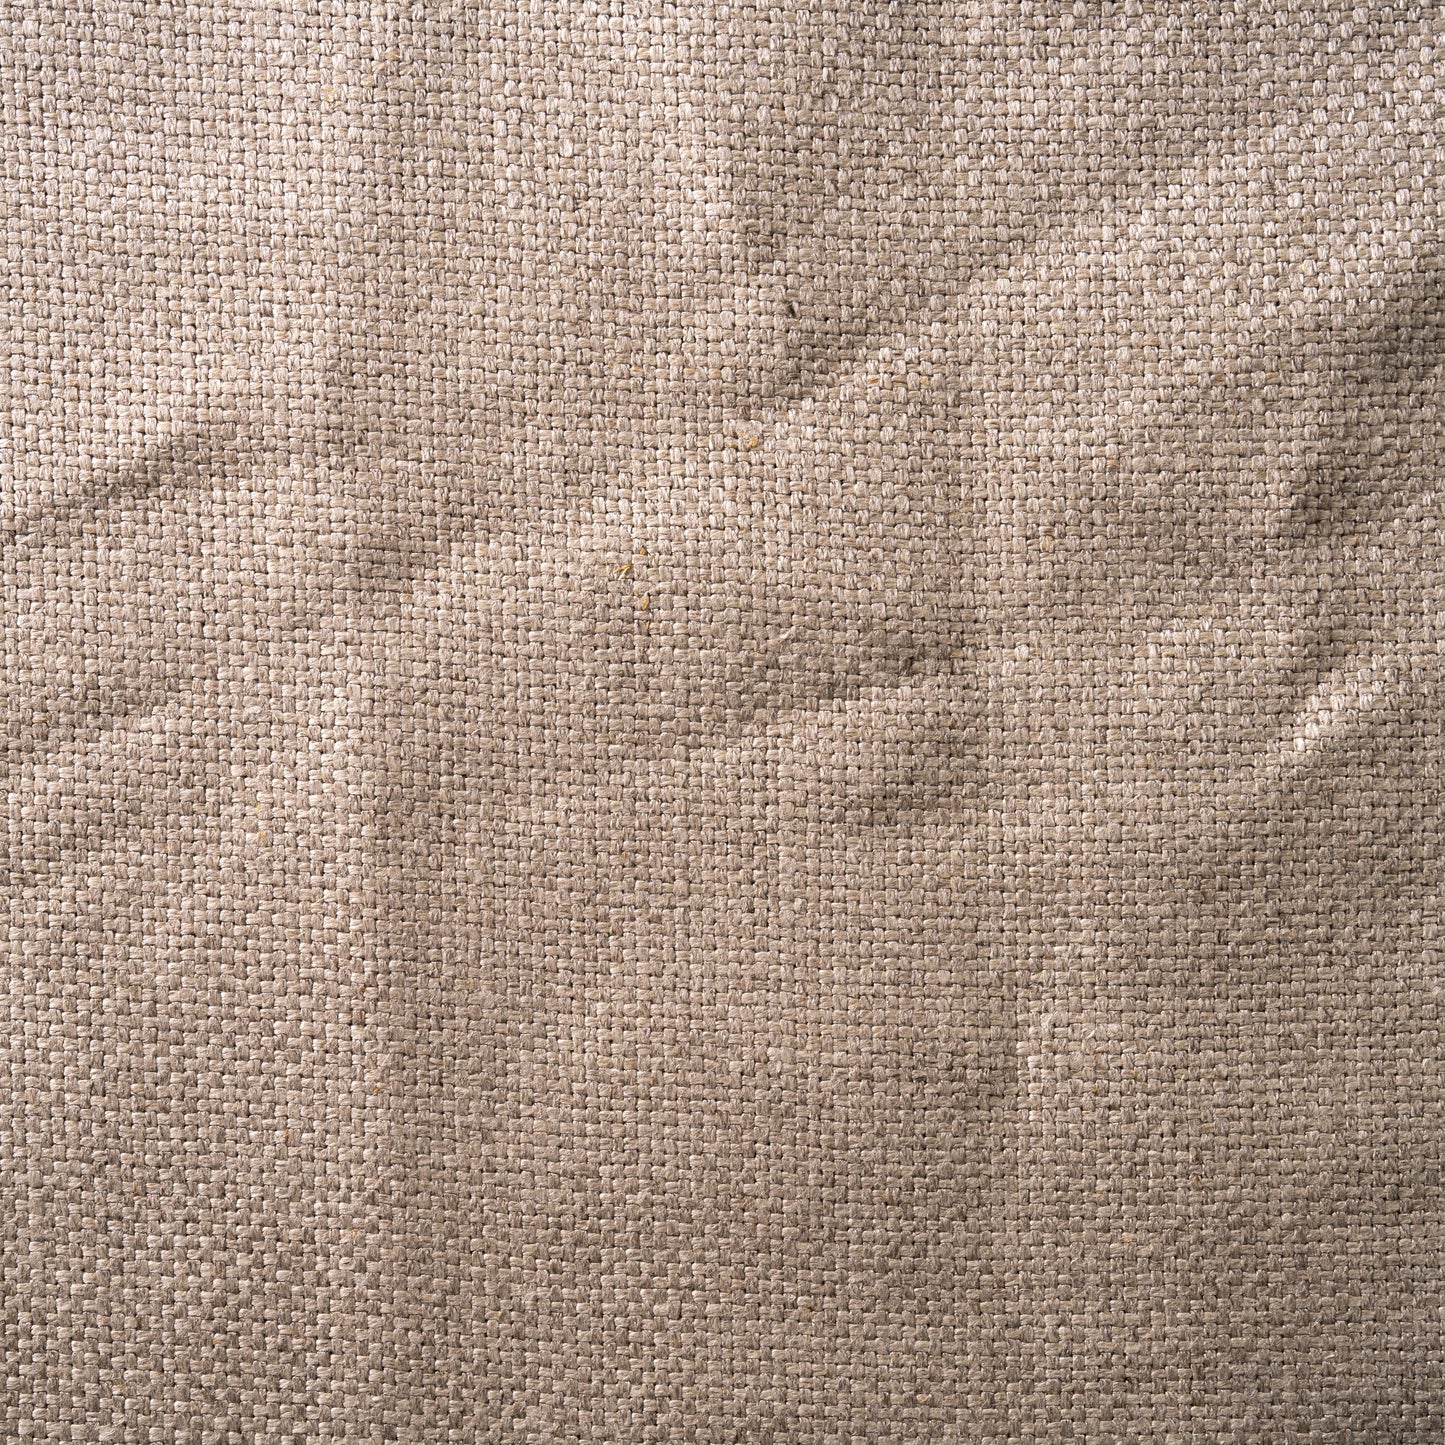 14.5 oz/sq yard 100% Upholstery Weight Linen in Natural Swatch